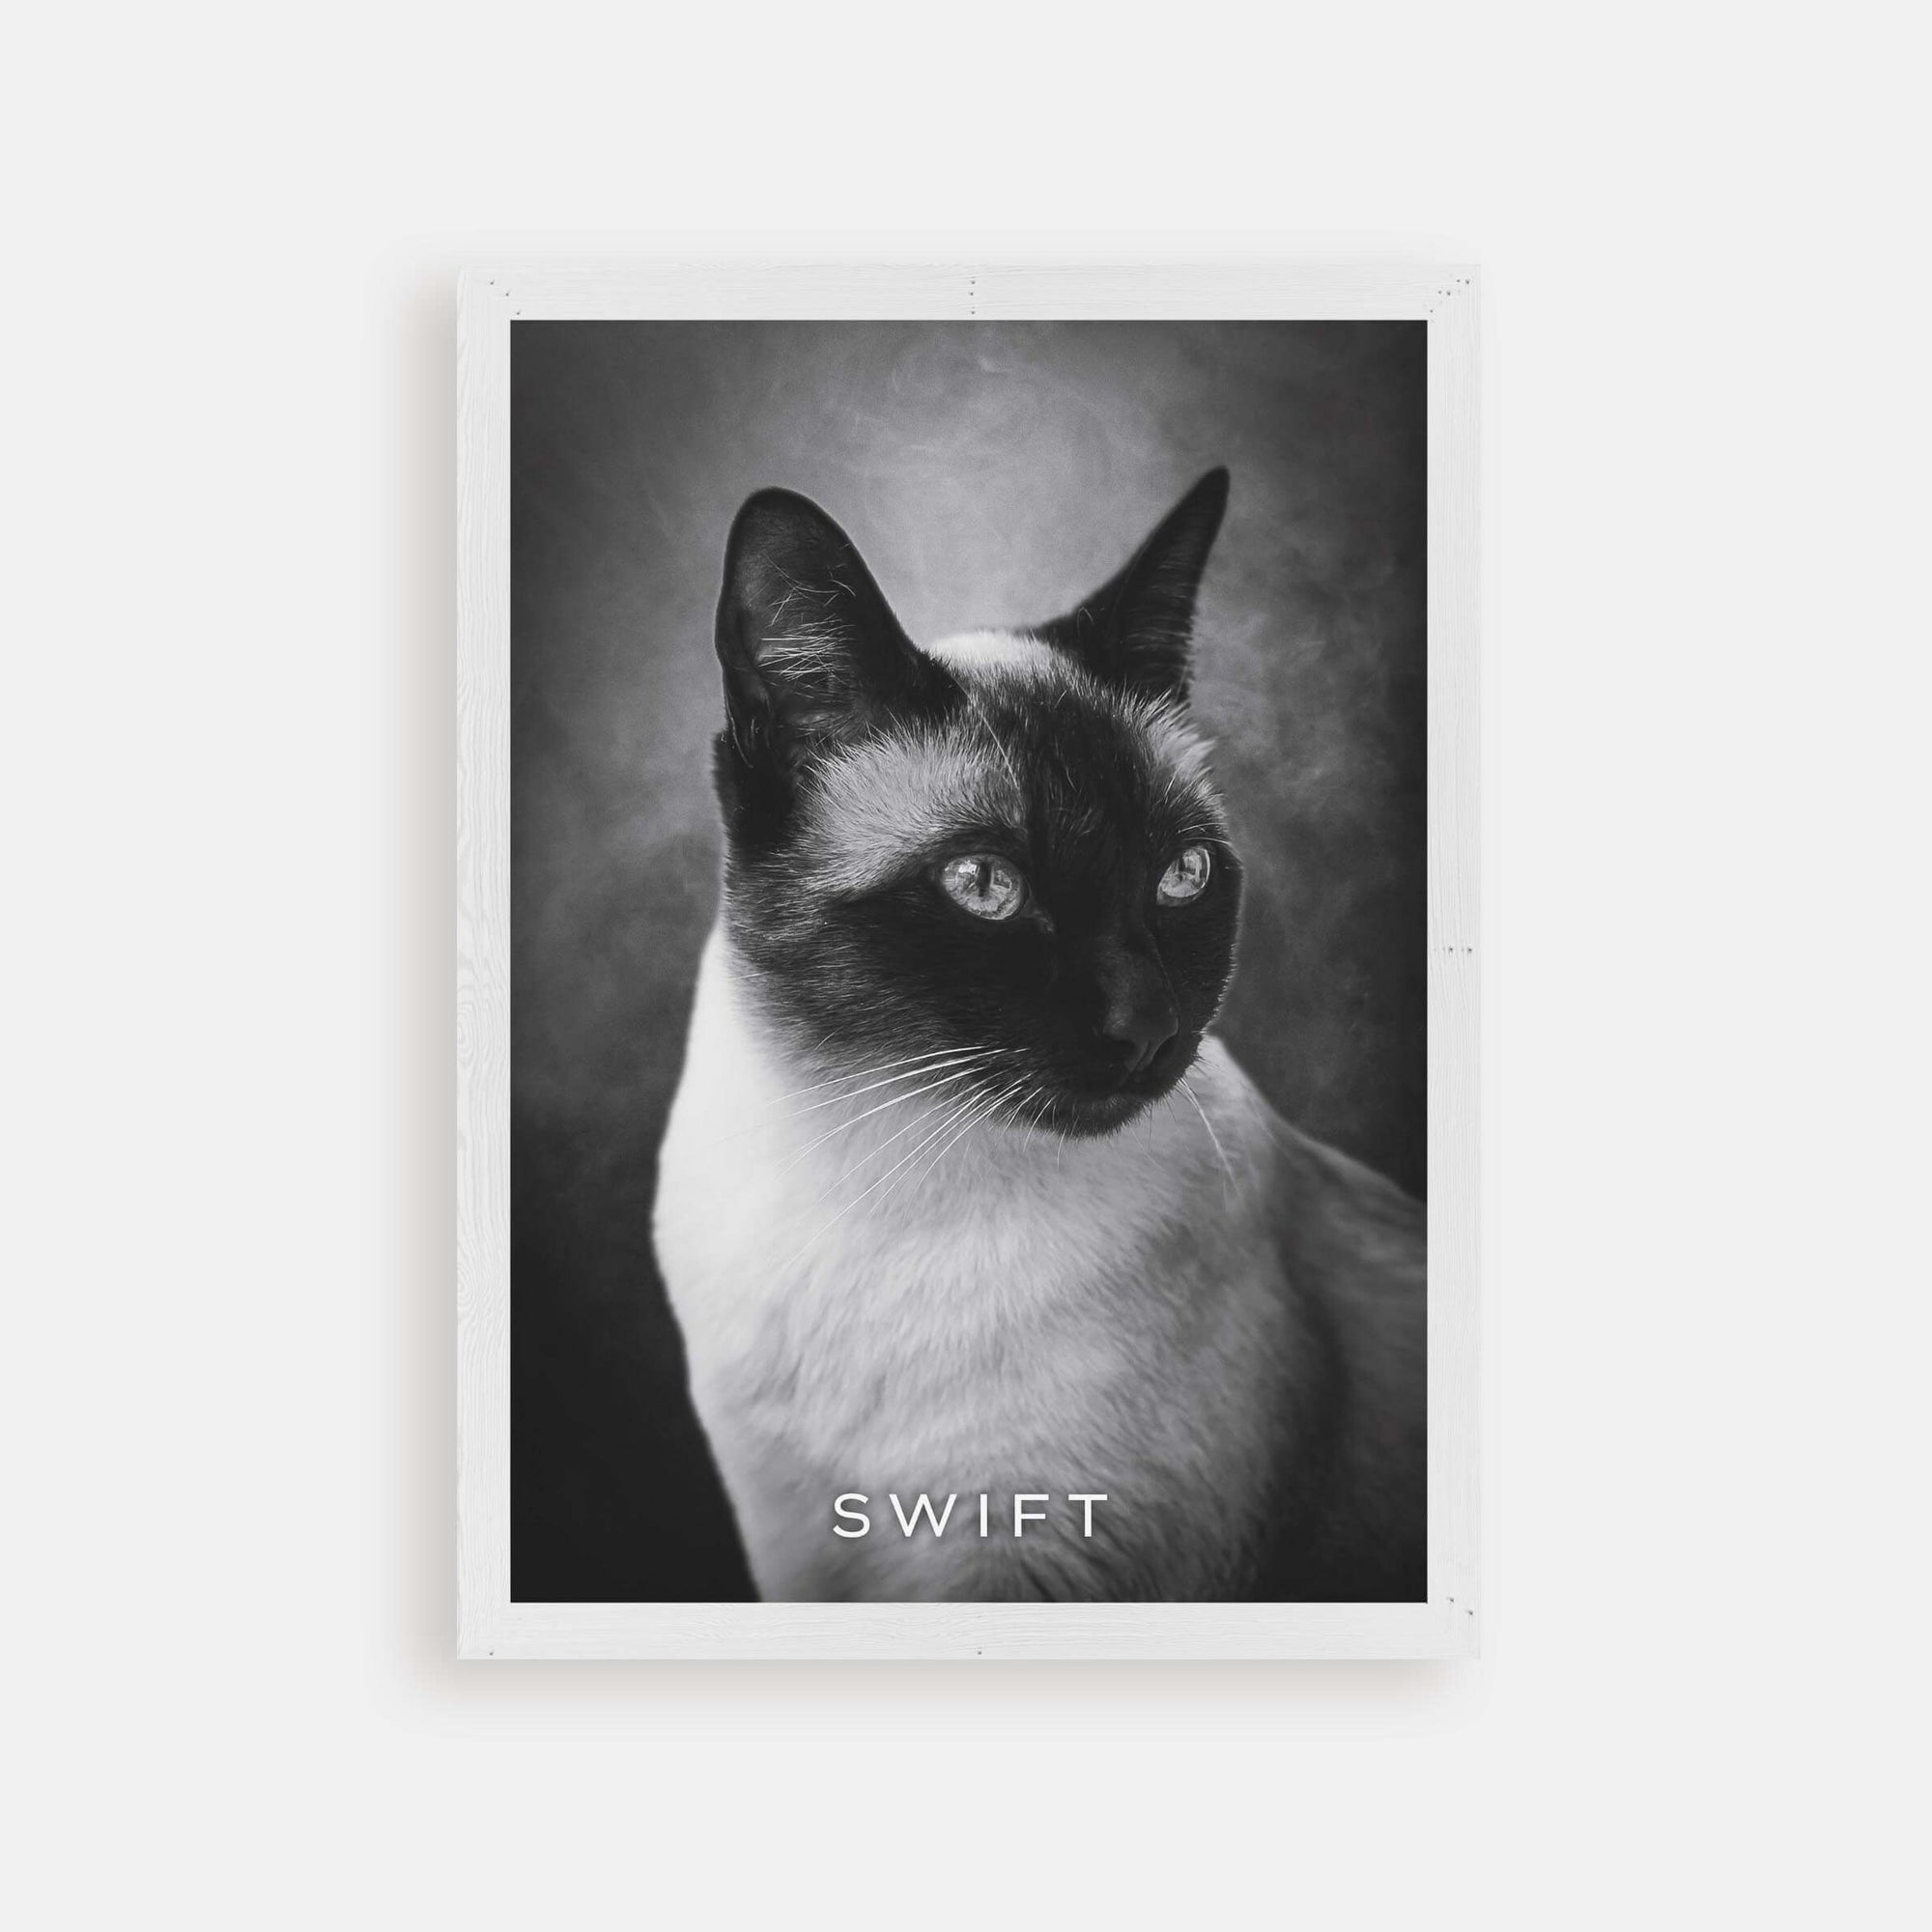 cat memorial art gift ideas in personalized frame